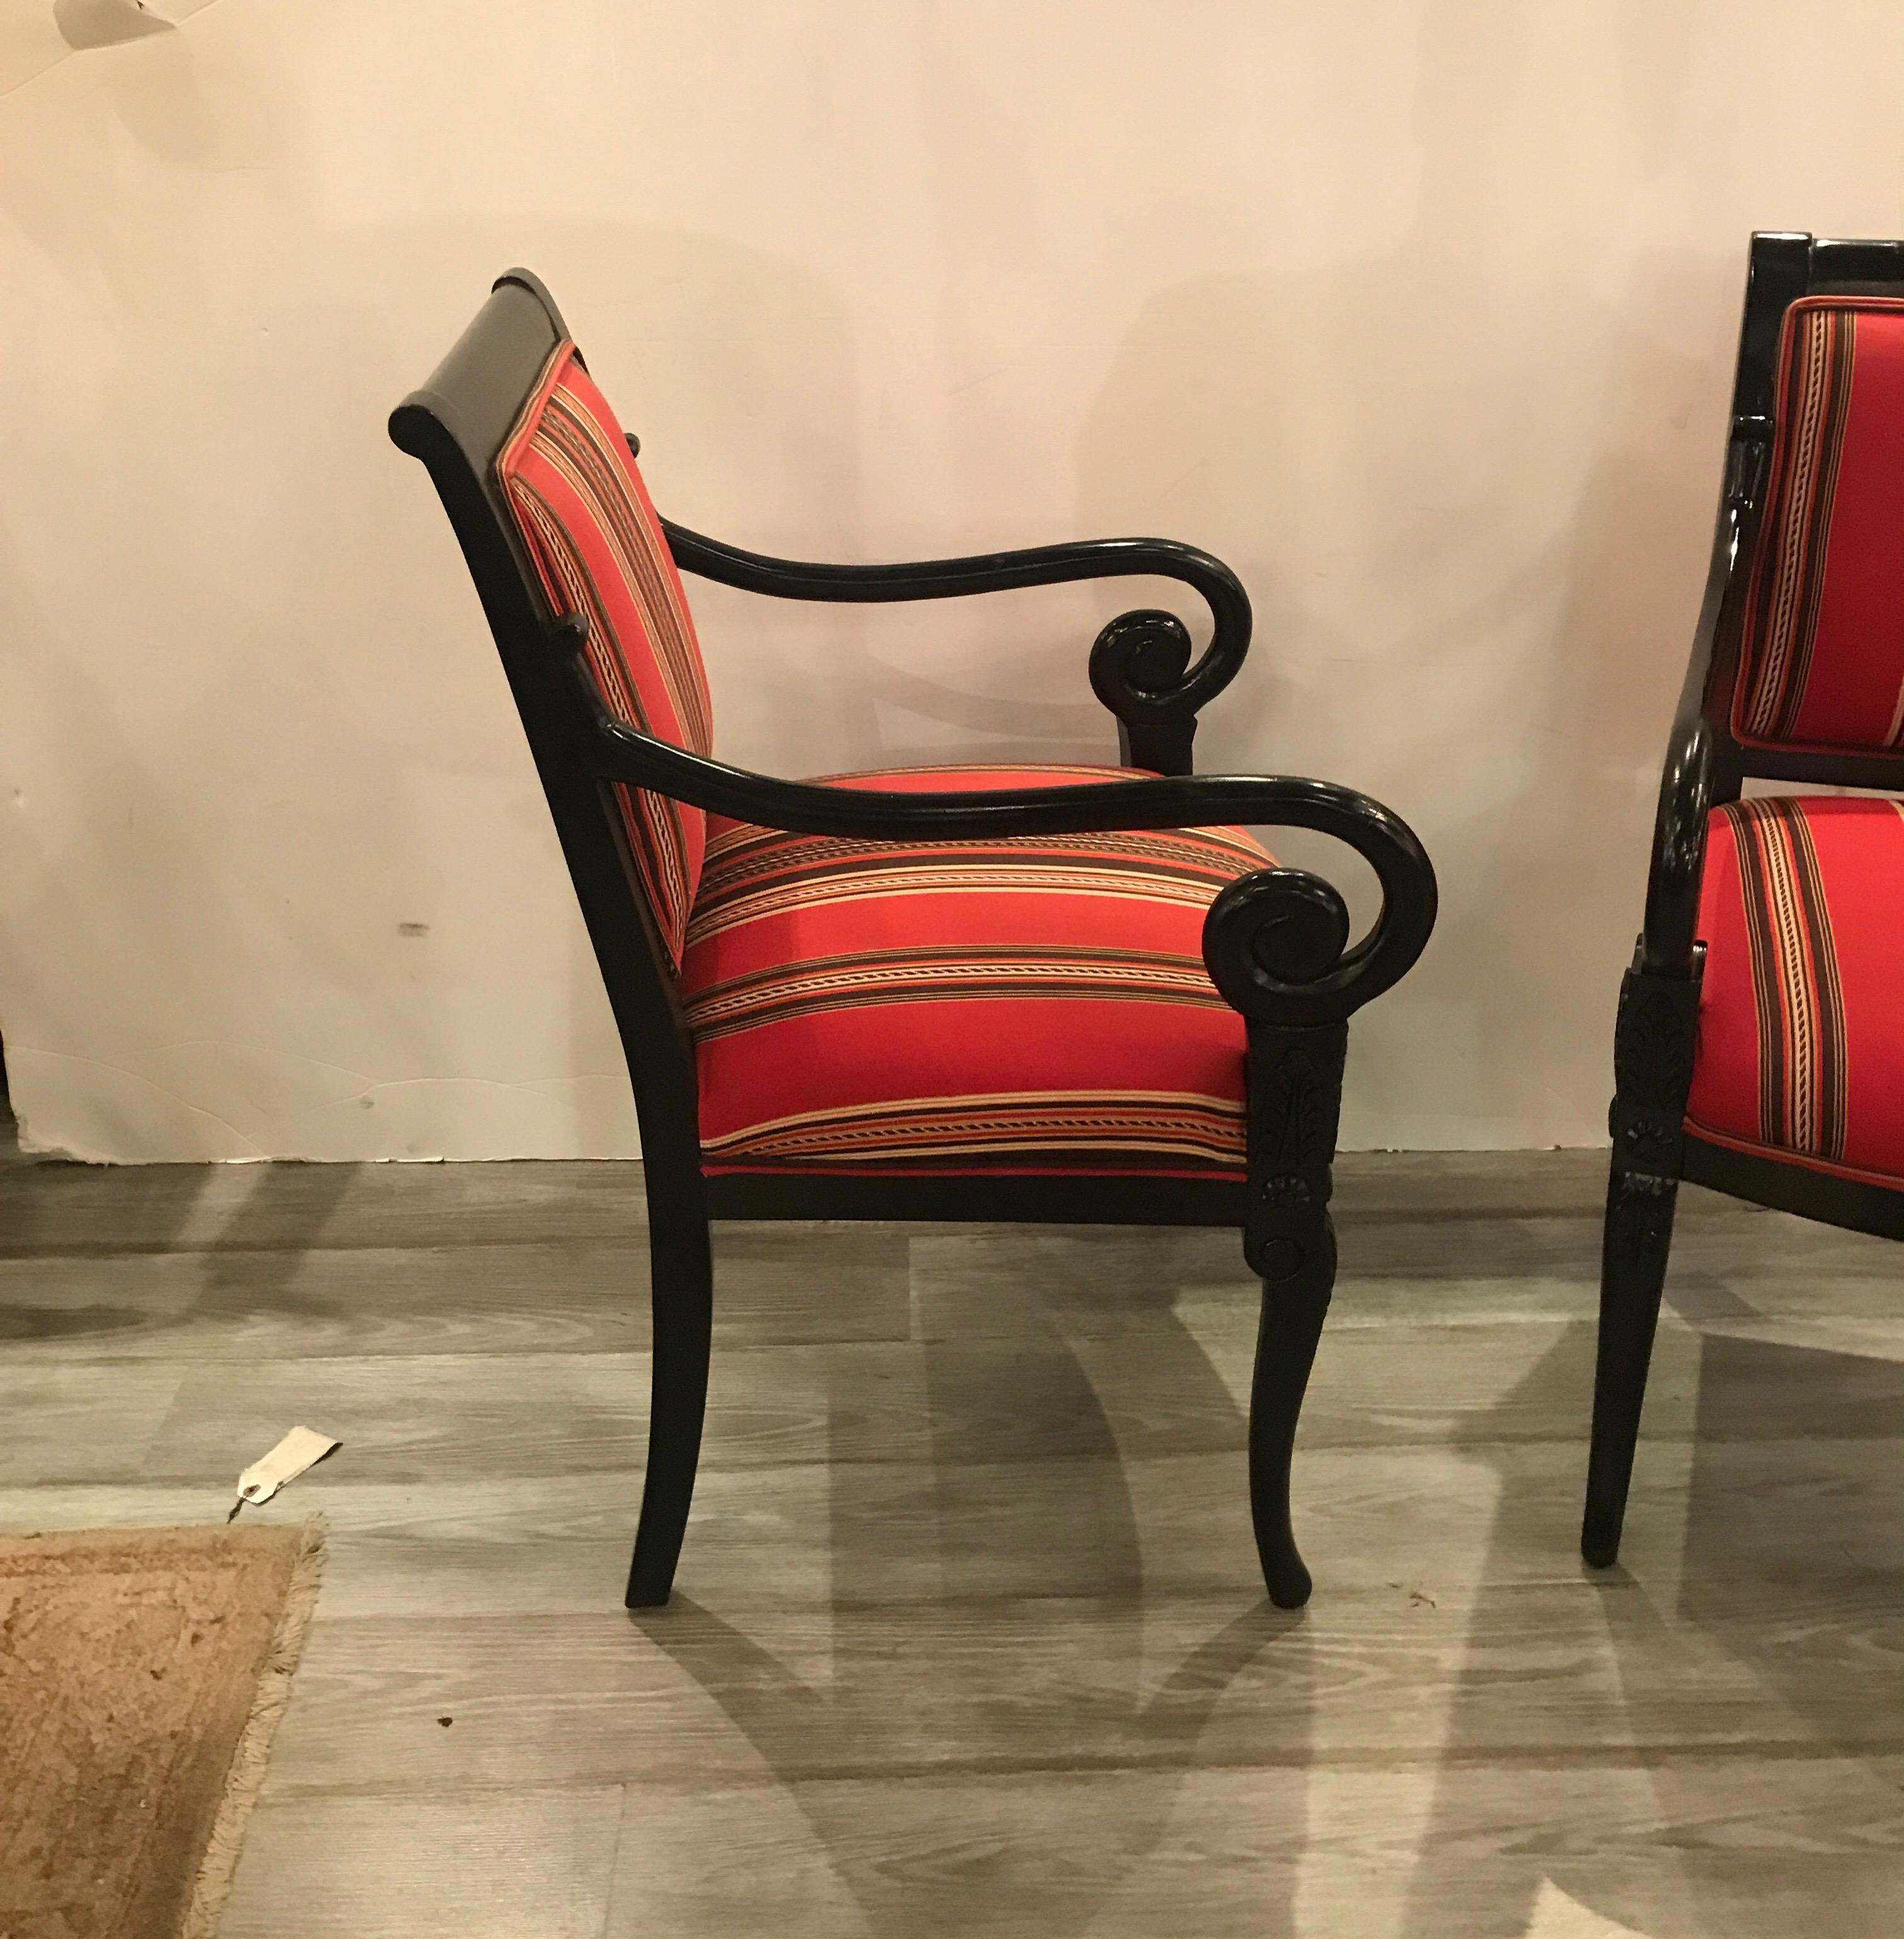 A stylish pair of Hollywood Regency neoclassical armchairs with new upholstery. The black ebonized frames with carved detail on the upper part of the front legs with graceful scrolling arms. The back and seats in a vibrant woven red fabric.